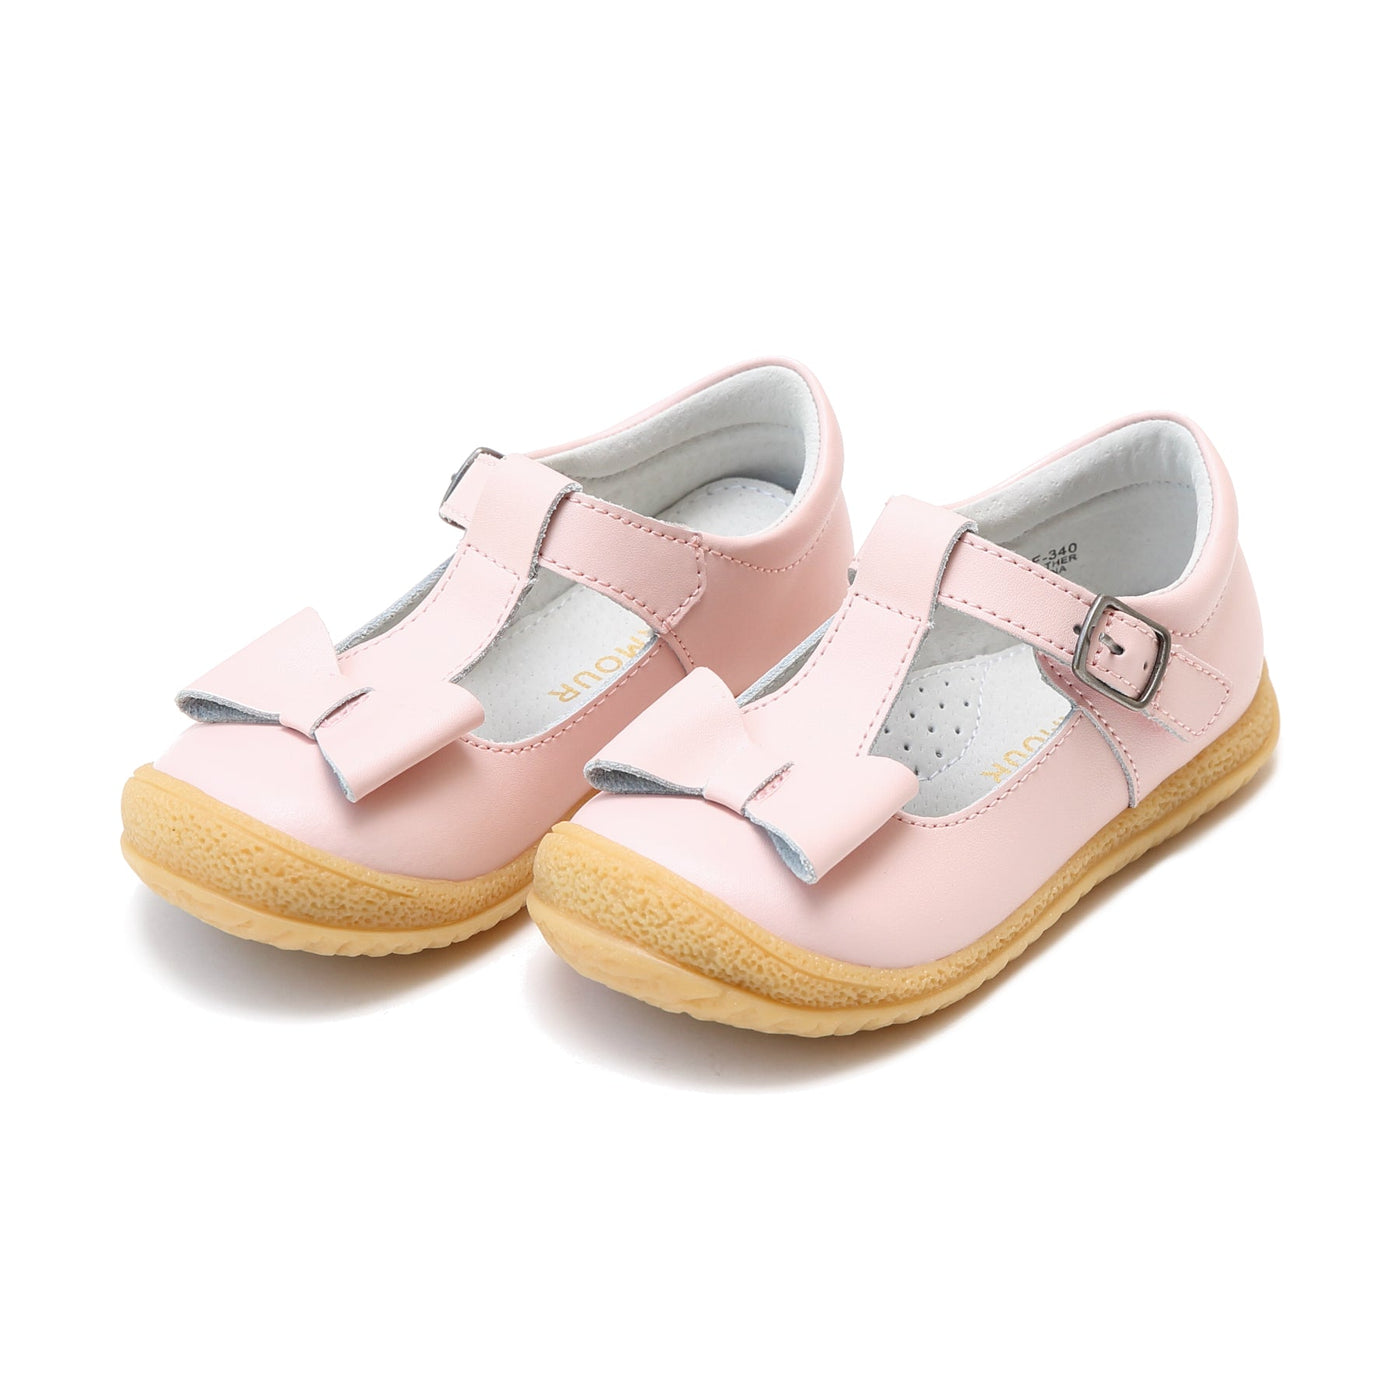 L'Amour Pink Emma Bow T-Strap Mary Jane